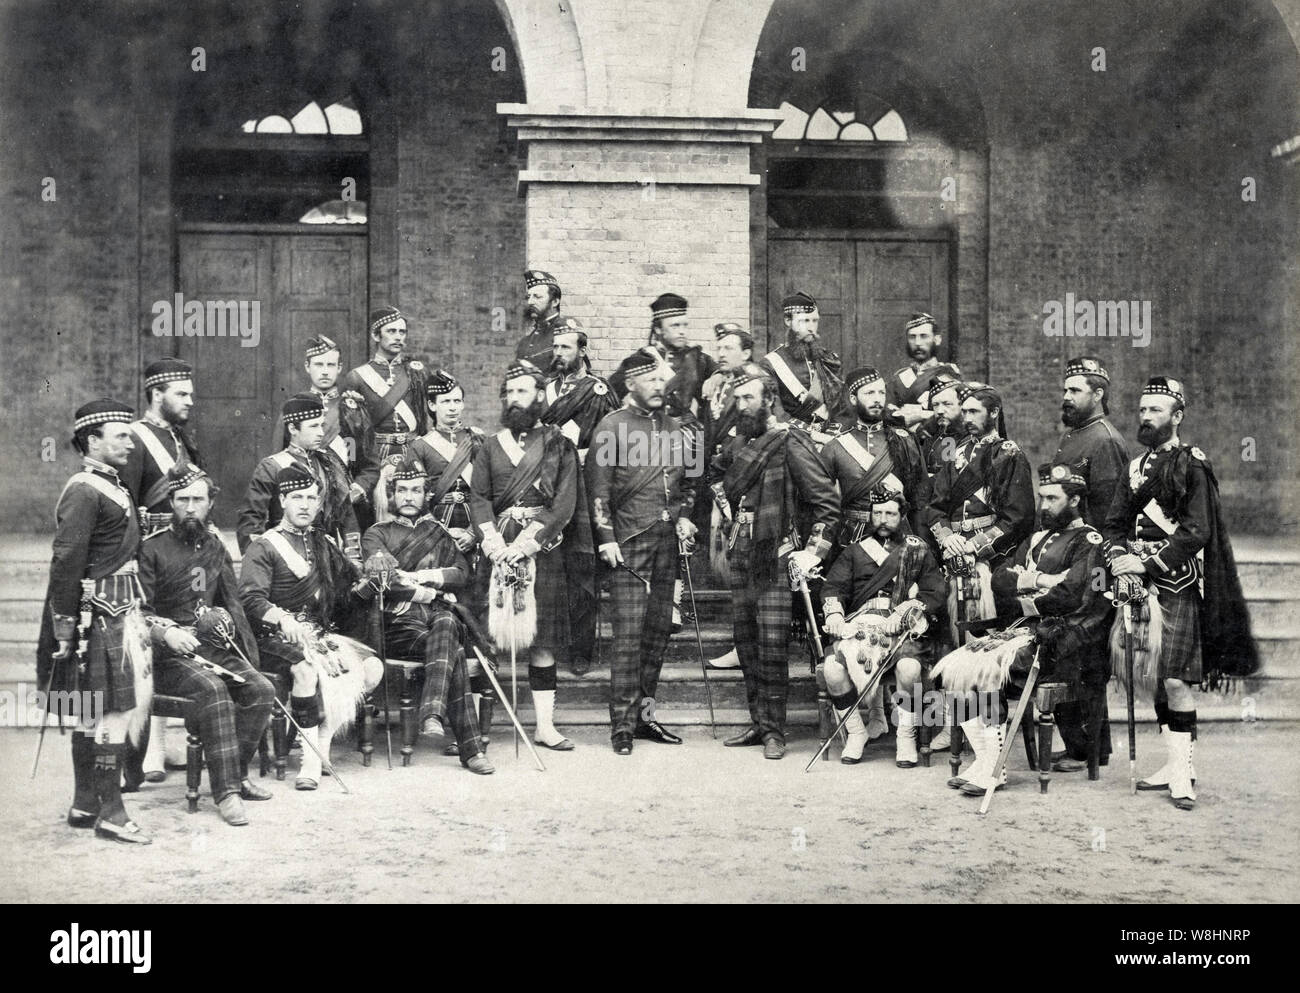 19th century vintage photograph - Officers of the 92nd Highlanders, Scottish army regiment, India, 1870 Stock Photo